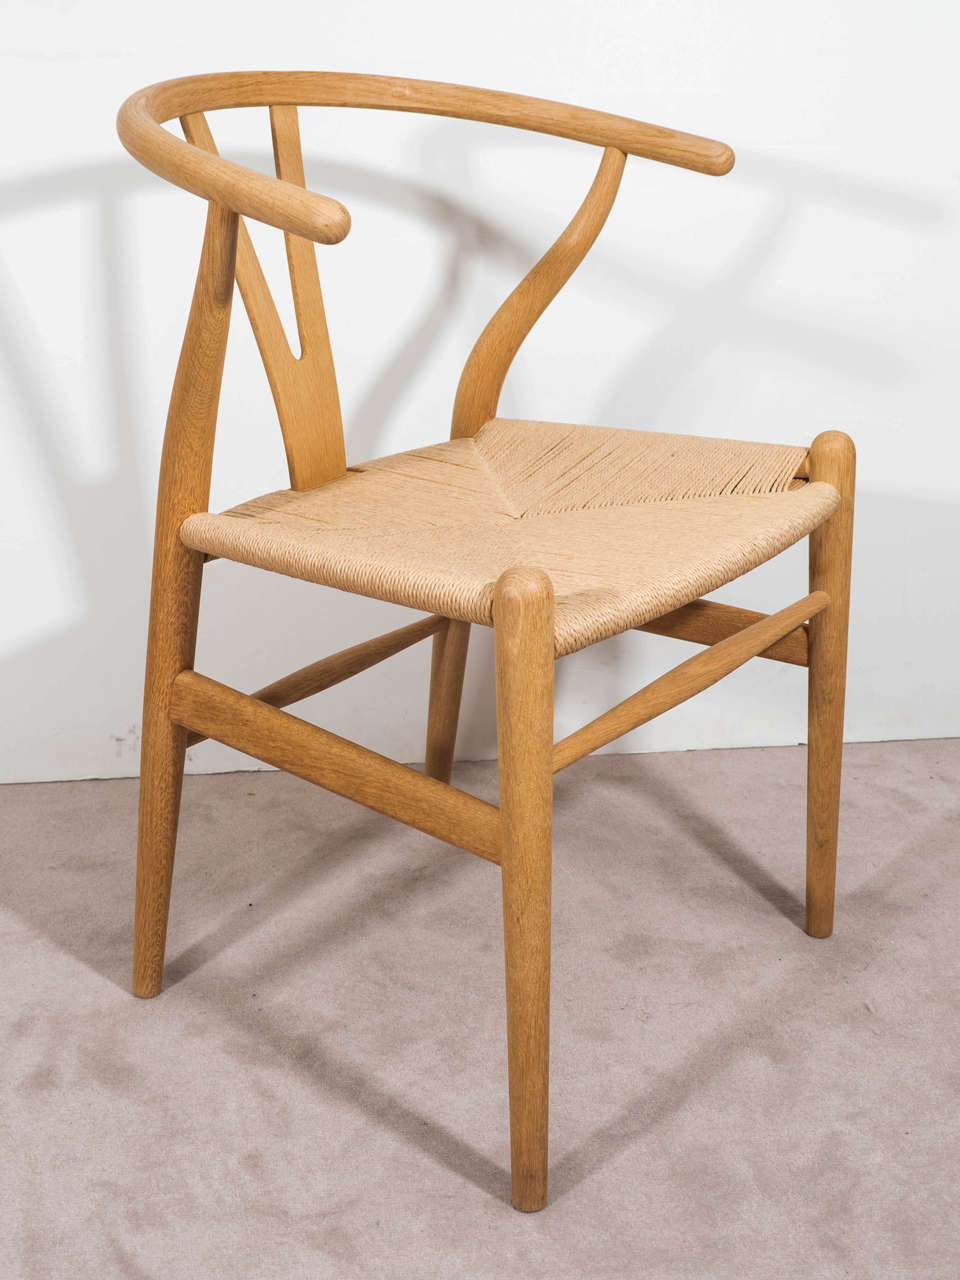 A contemporary pair of wishbone arm chairs in wood with back-splat and paper-cord seats. A sticker on the bottom of each denotes design by architect Hans J. Wegner, for Carl Hanson & Co and production date 2006. Good condition with some bleaching